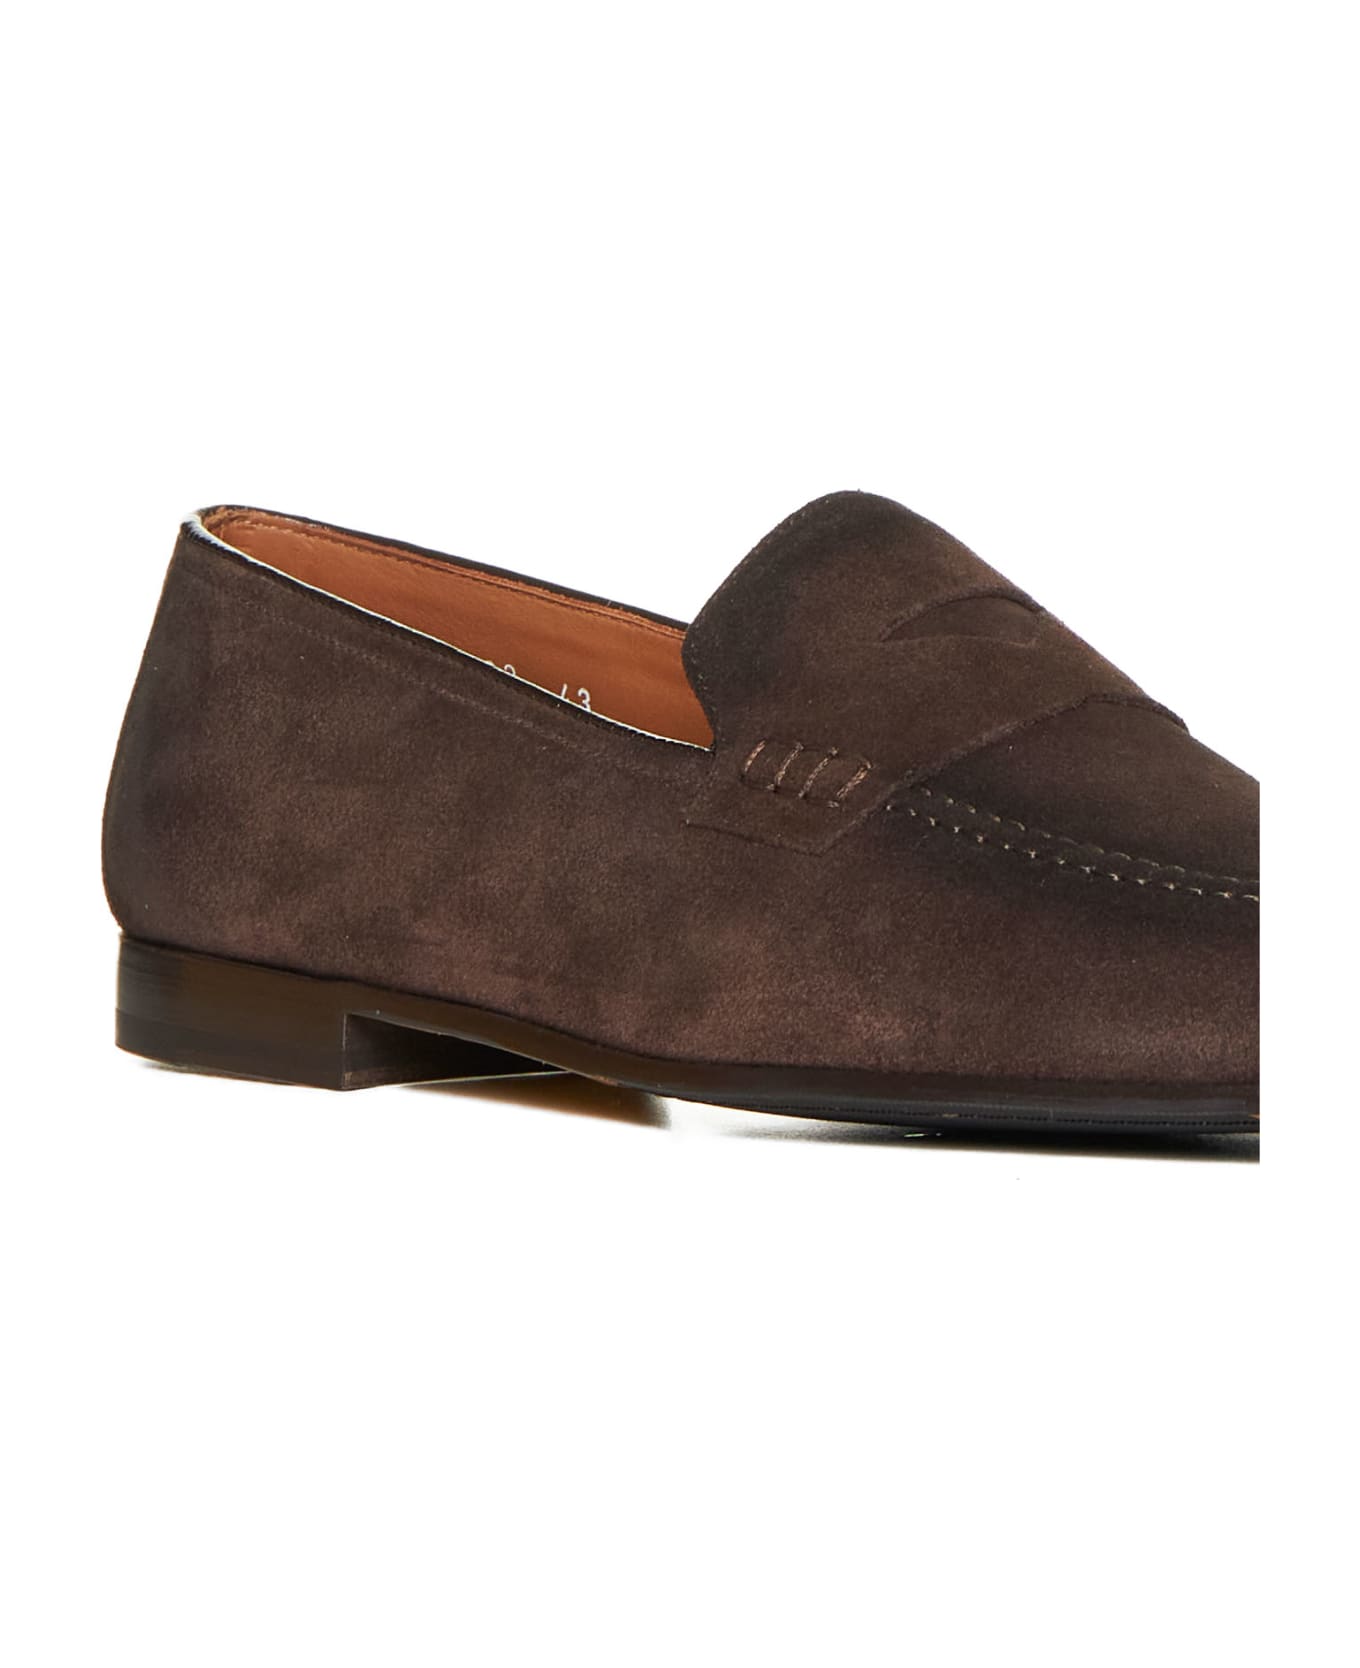 Doucal's Loafers - Terre + f.do t.moro